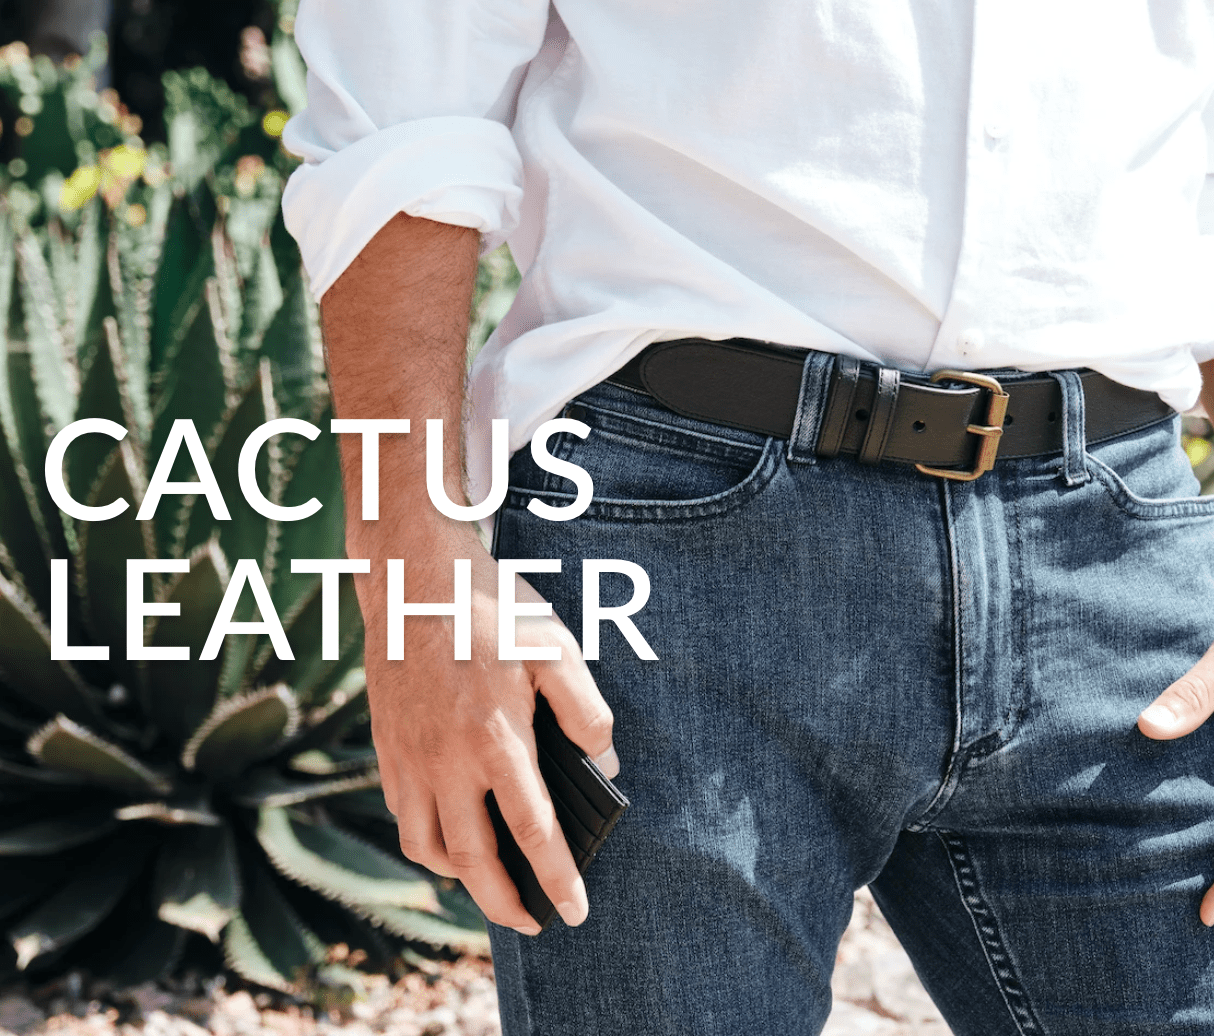 What is Cactus Leather?